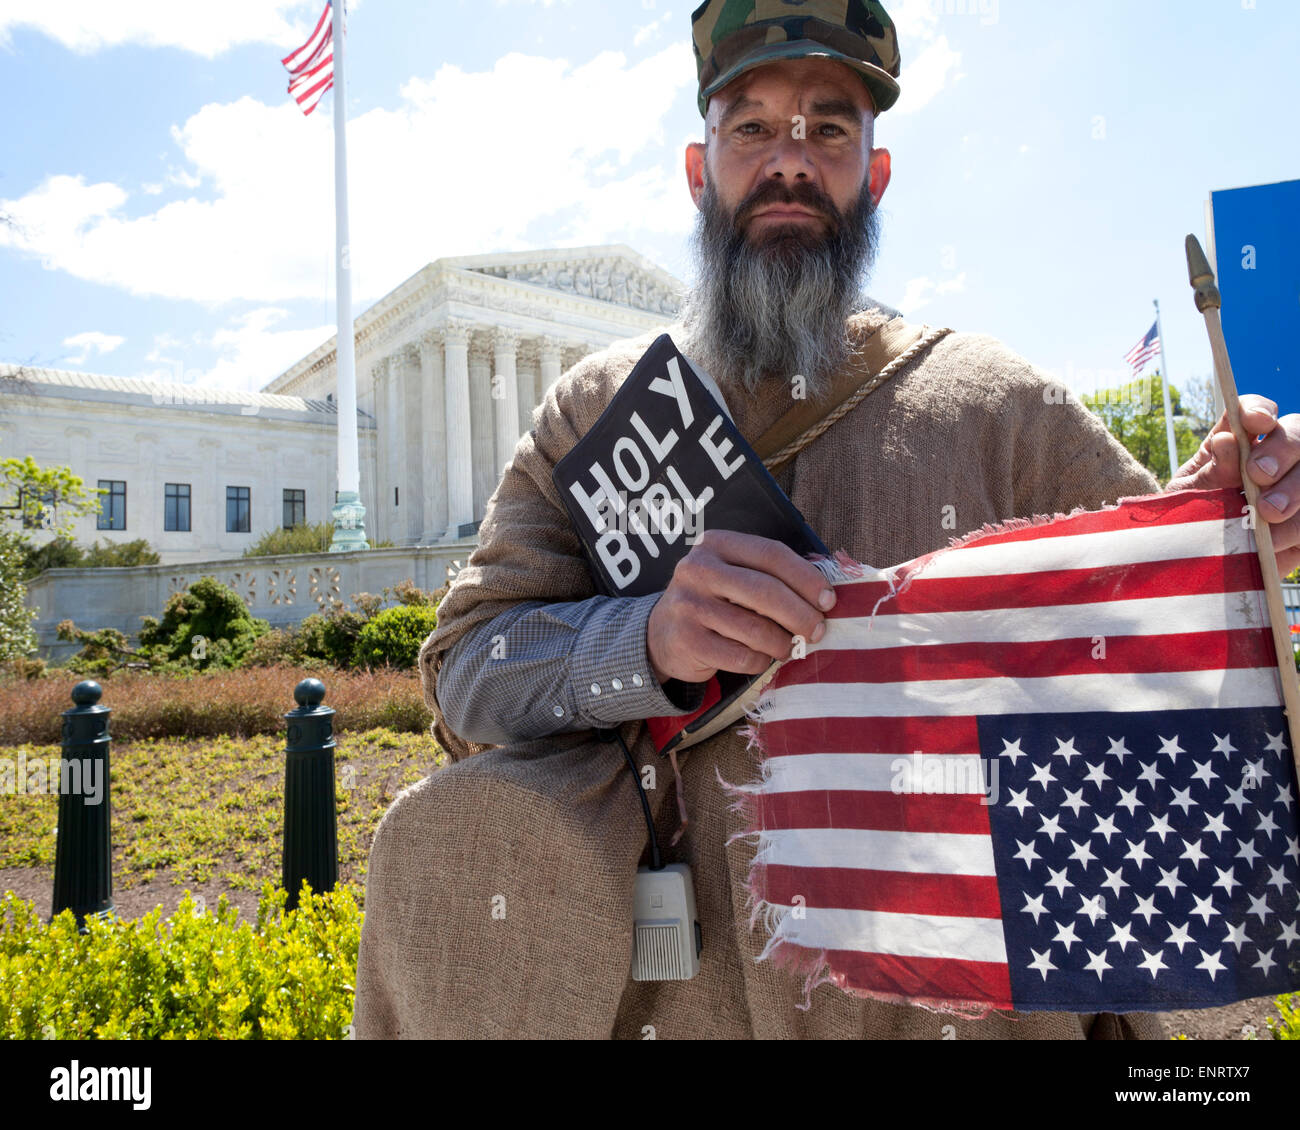 Alan Hoyle carrying a Holy Bible and upside down American Flag in front of The US Supreme Court building - Washington, DC USA Stock Photo